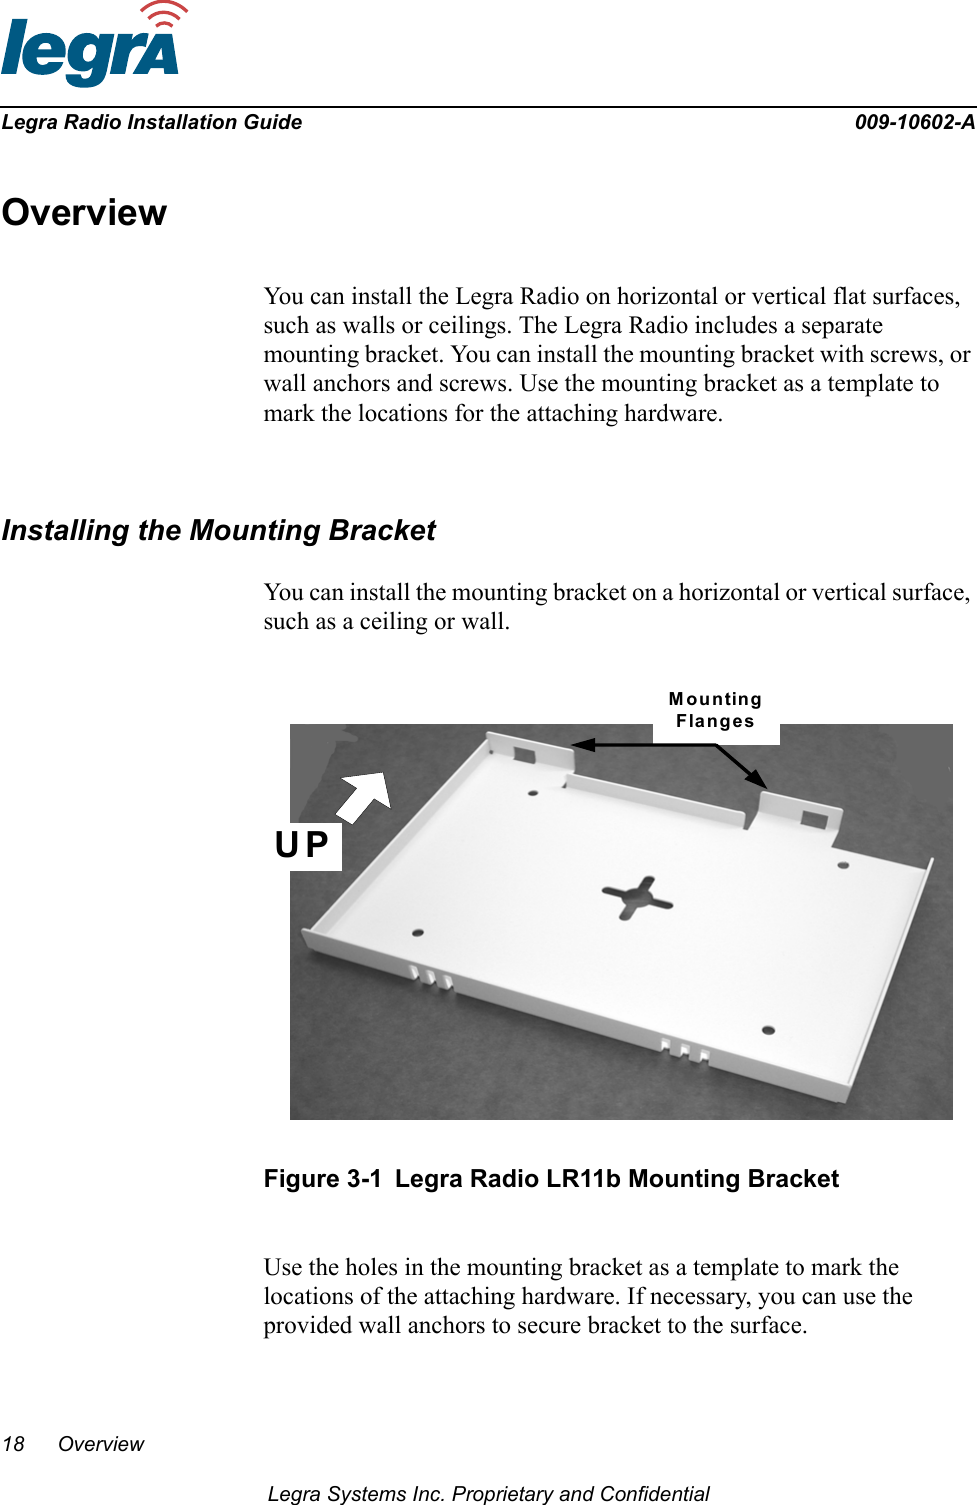 18 OverviewLegra Systems Inc. Proprietary and ConfidentialLegra Radio Installation Guide 009-10602-AOverviewYou can install the Legra Radio on horizontal or vertical flat surfaces, such as walls or ceilings. The Legra Radio includes a separate mounting bracket. You can install the mounting bracket with screws, or wall anchors and screws. Use the mounting bracket as a template to mark the locations for the attaching hardware.Installing the Mounting BracketYou can install the mounting bracket on a horizontal or vertical surface, such as a ceiling or wall. Figure 3-1 Legra Radio LR11b Mounting BracketUse the holes in the mounting bracket as a template to mark the locations of the attaching hardware. If necessary, you can use the provided wall anchors to secure bracket to the surface.UPMountingFlanges